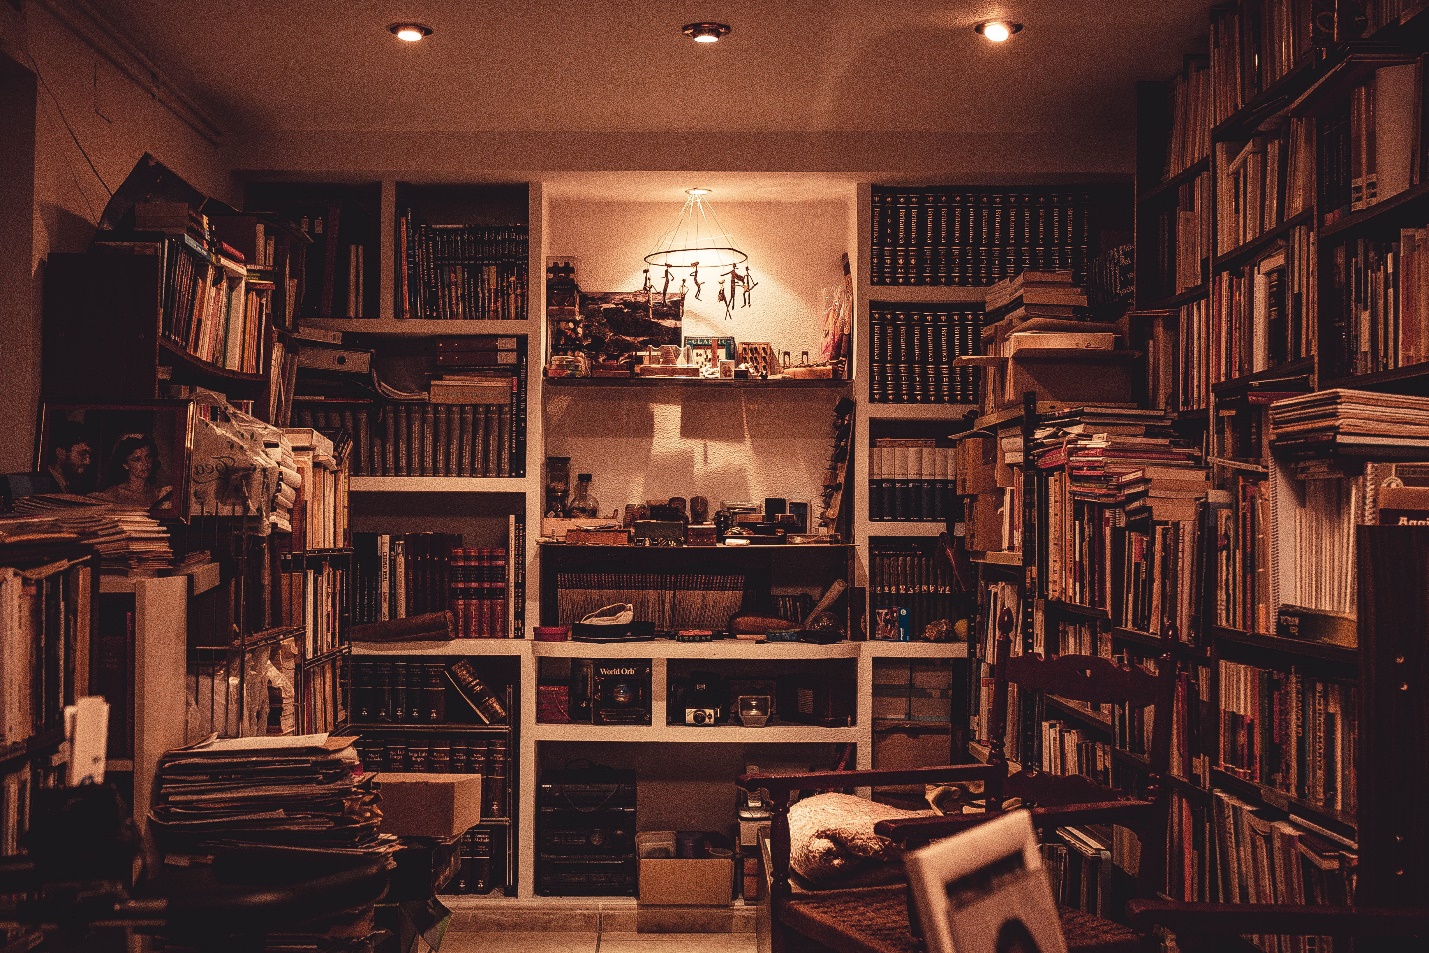 room filled with junk and books